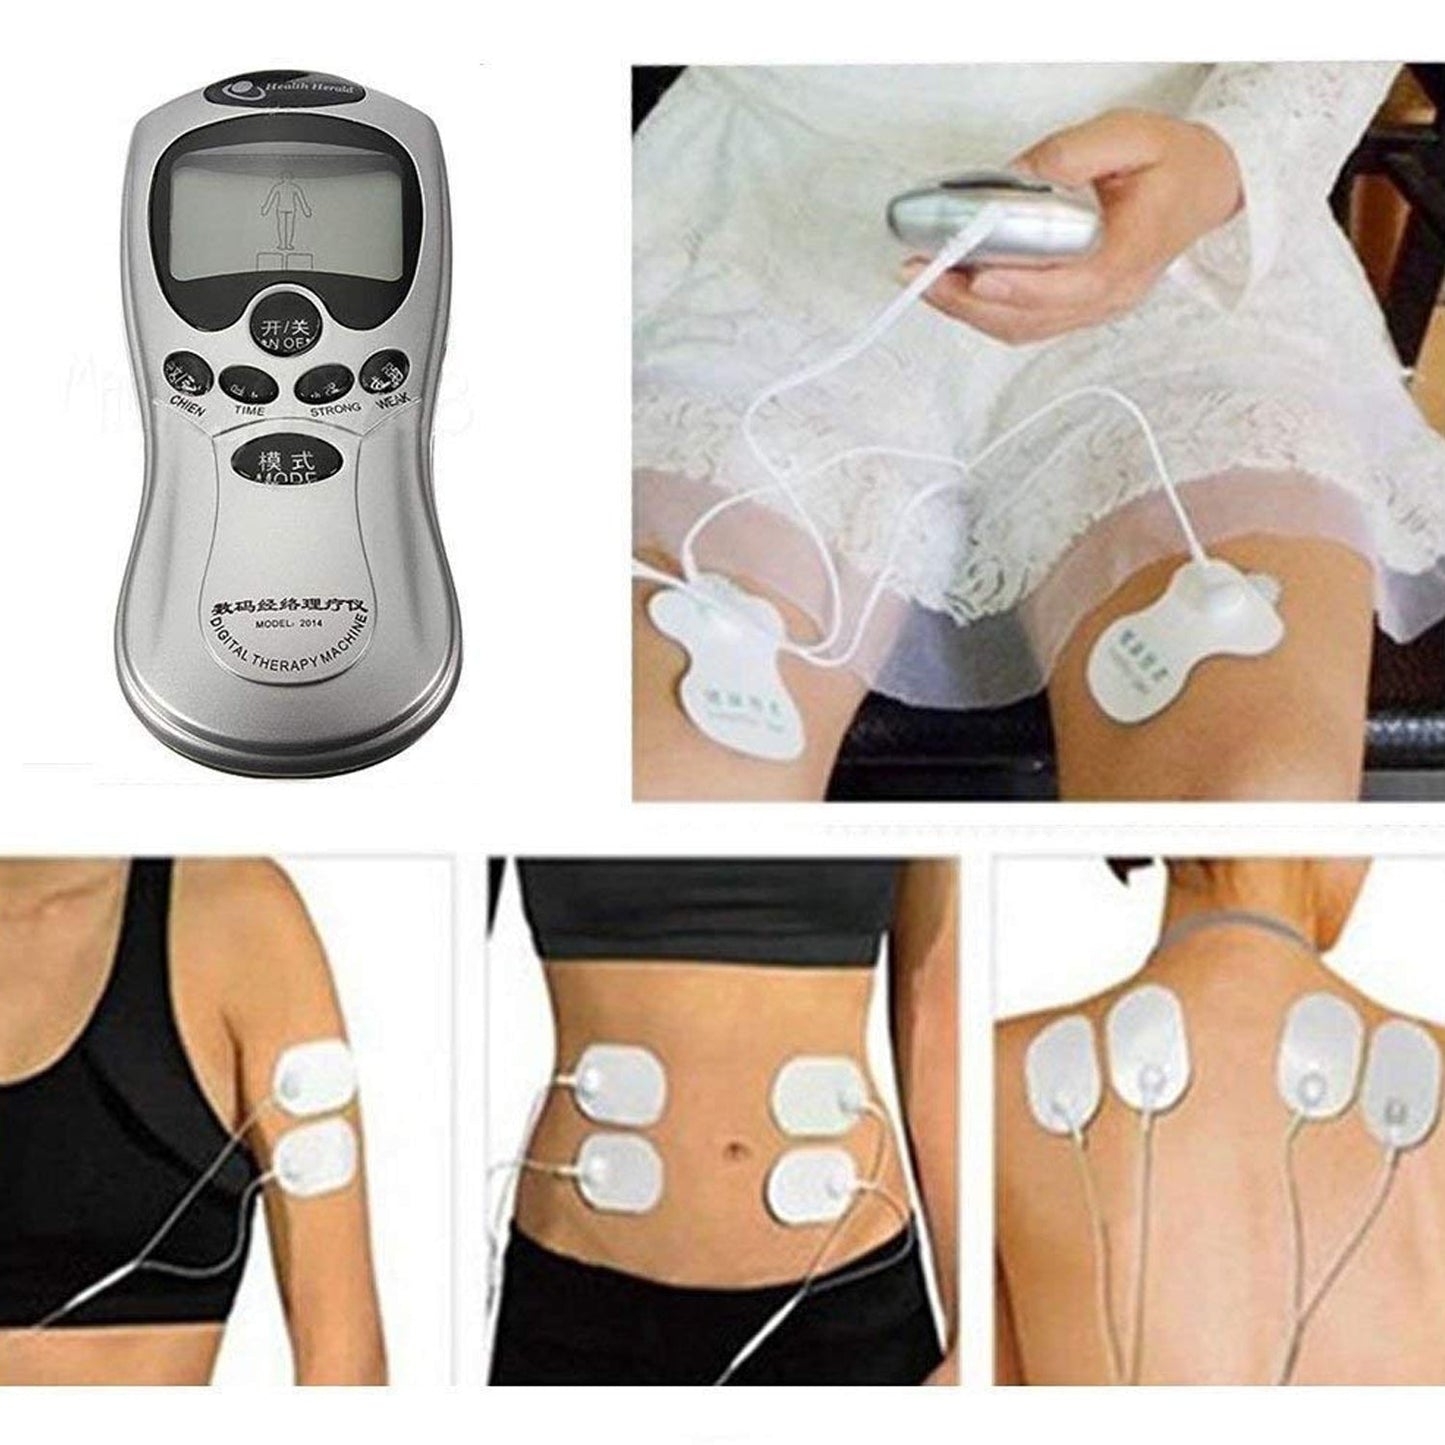 6723  Multifunctional Massager, Health Care Digital Chinese Meridian Tens Therapy Massager Relax Body Muscle Accupuncture Machine 4 Electrode Pads & Charger Adapter and Cable,  Physiotherapy, Electric Digital Therapy neck back Mane Massage